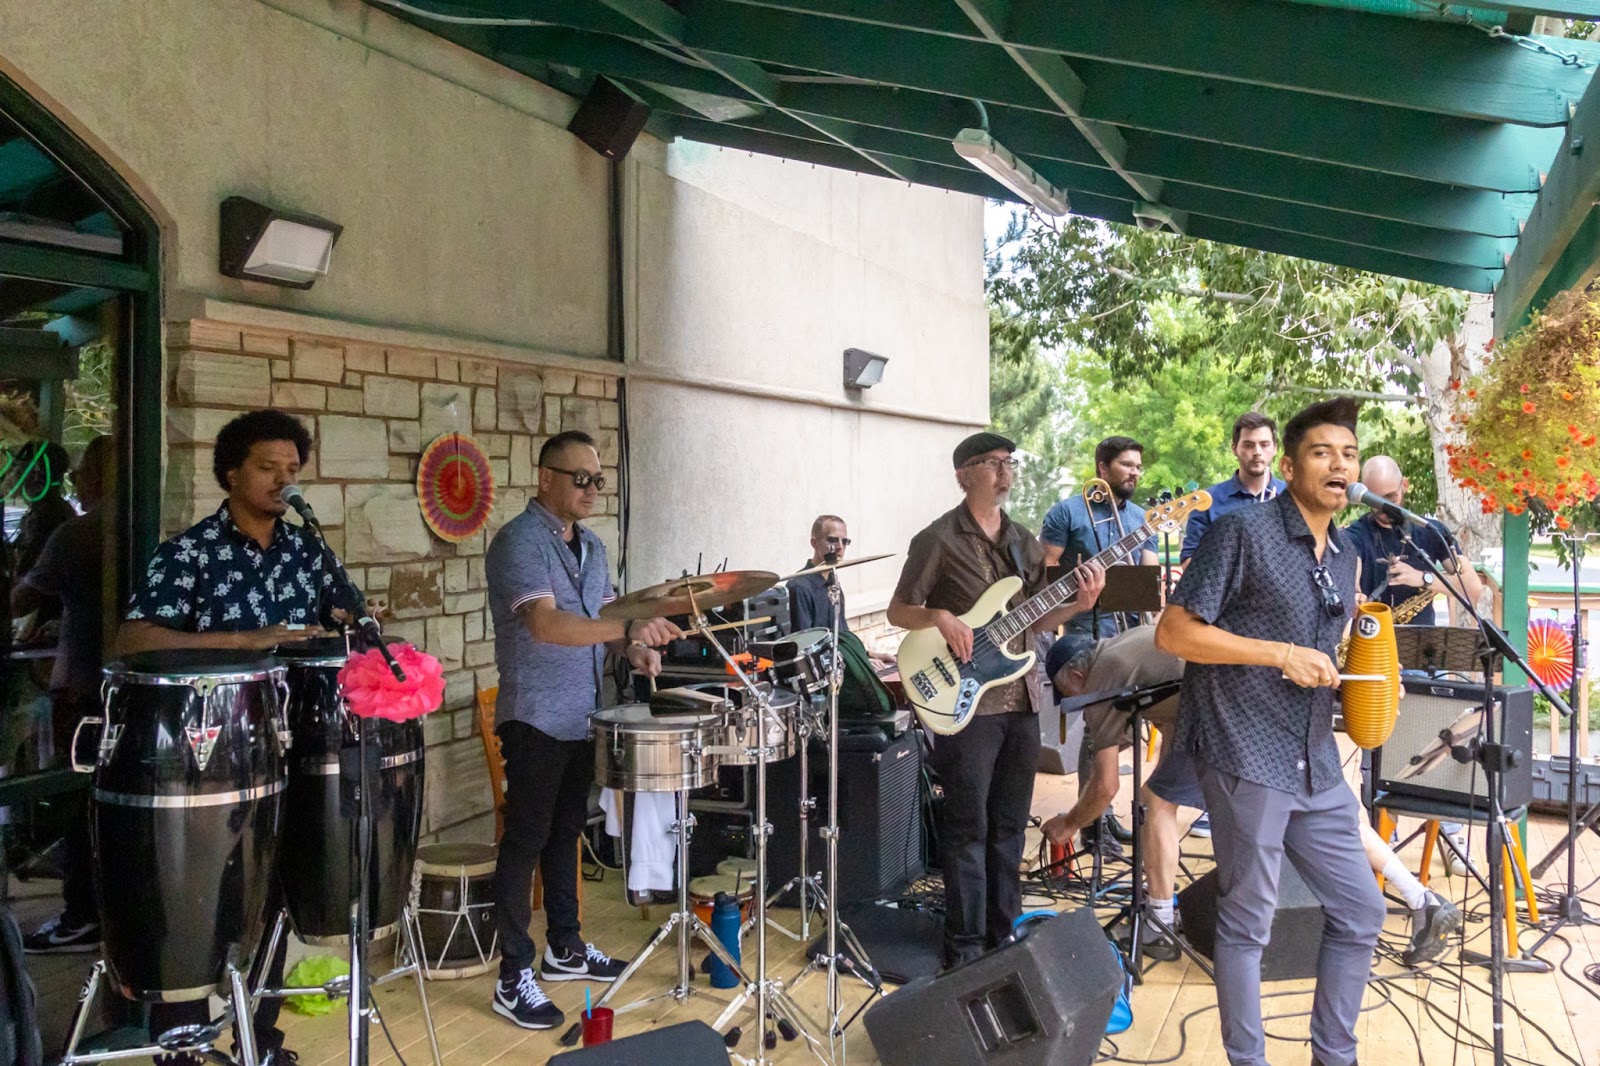 Local favorite Manabi Latin Band performs on the outdoor patio at the 2021 Family Center/La Familia Fiesta Party in Fort Collins, Colorado.